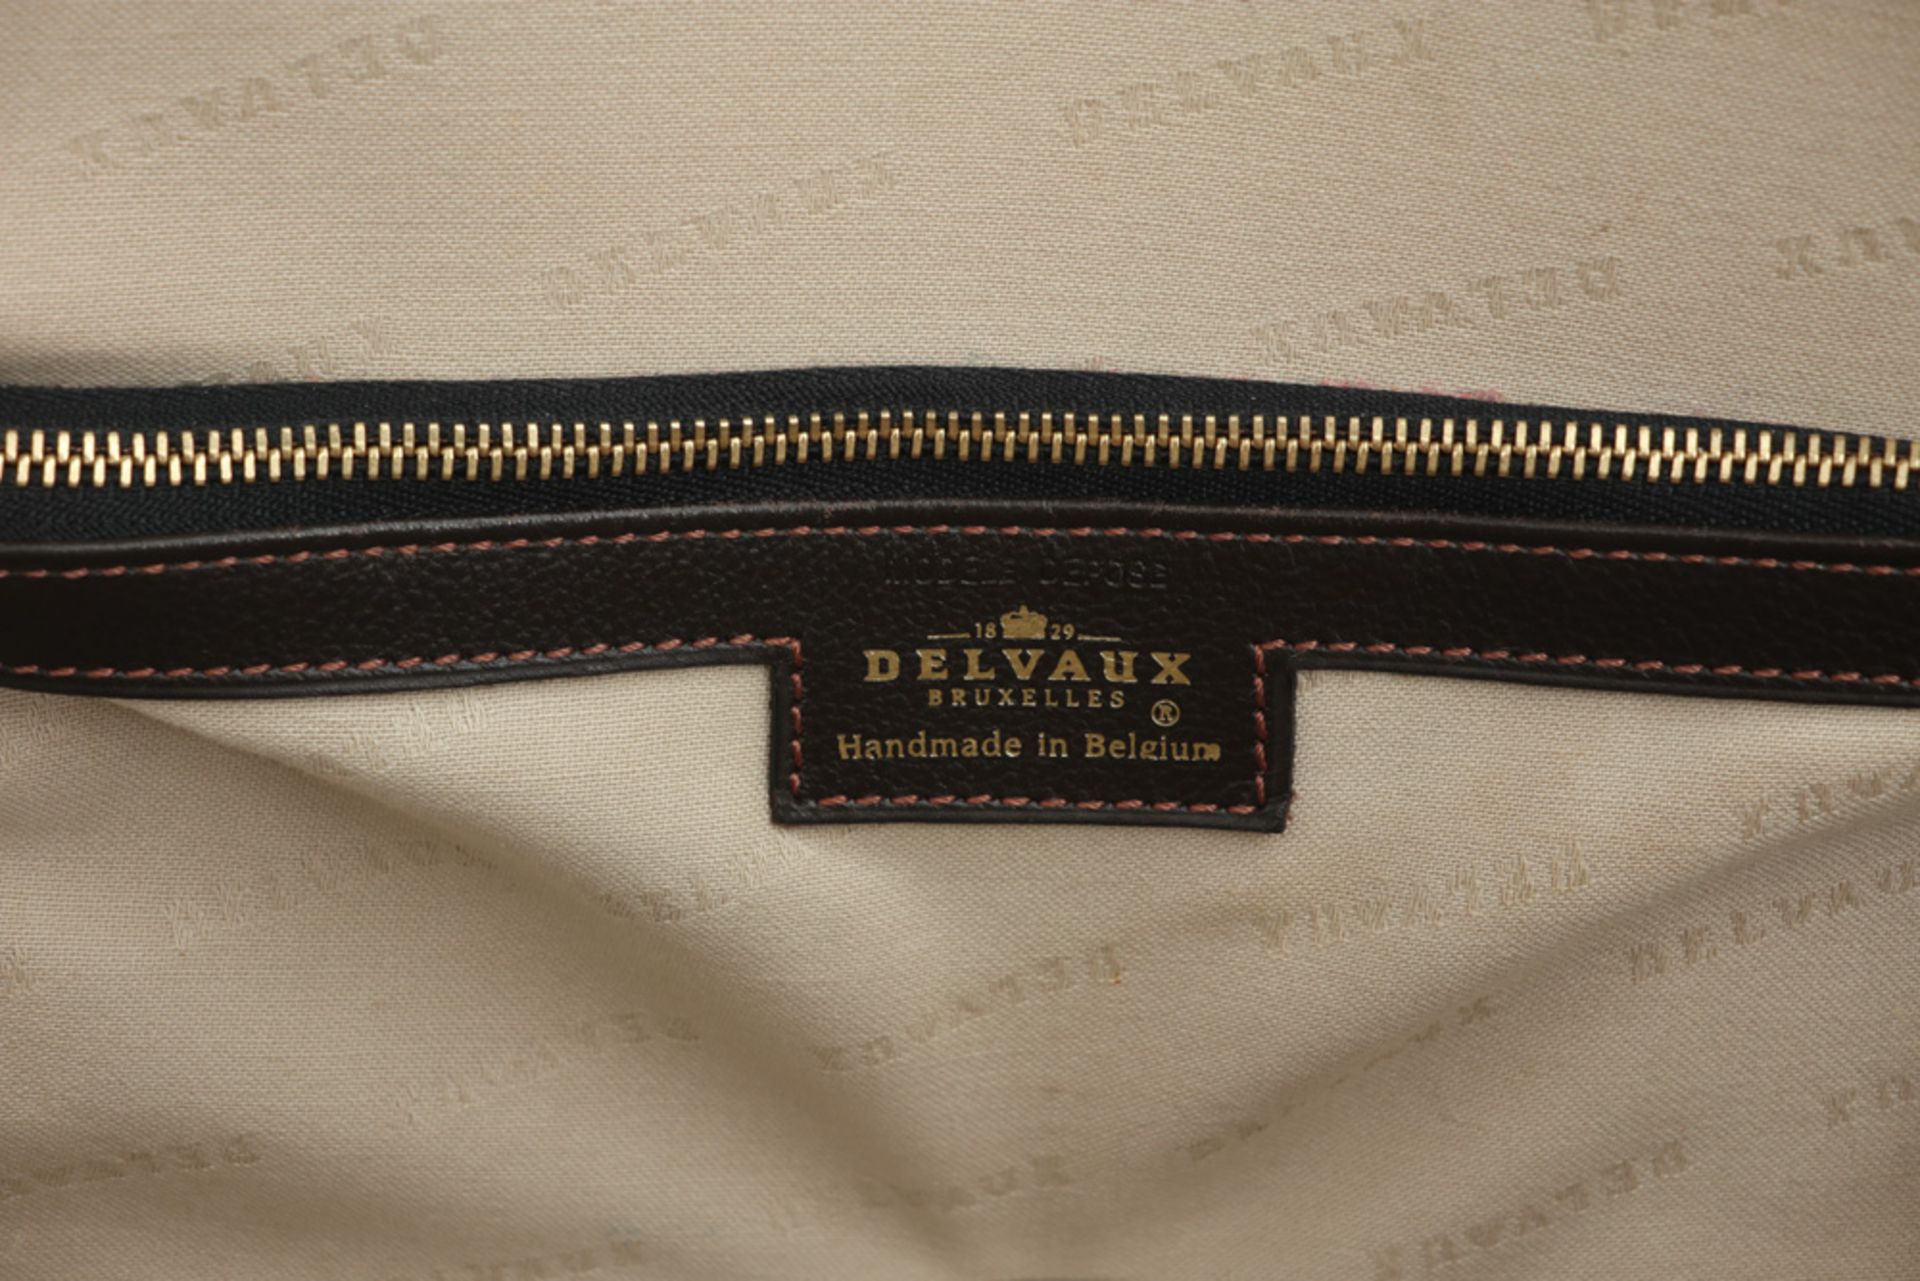 Delvaux marked handbag in brown leather - Image 3 of 4